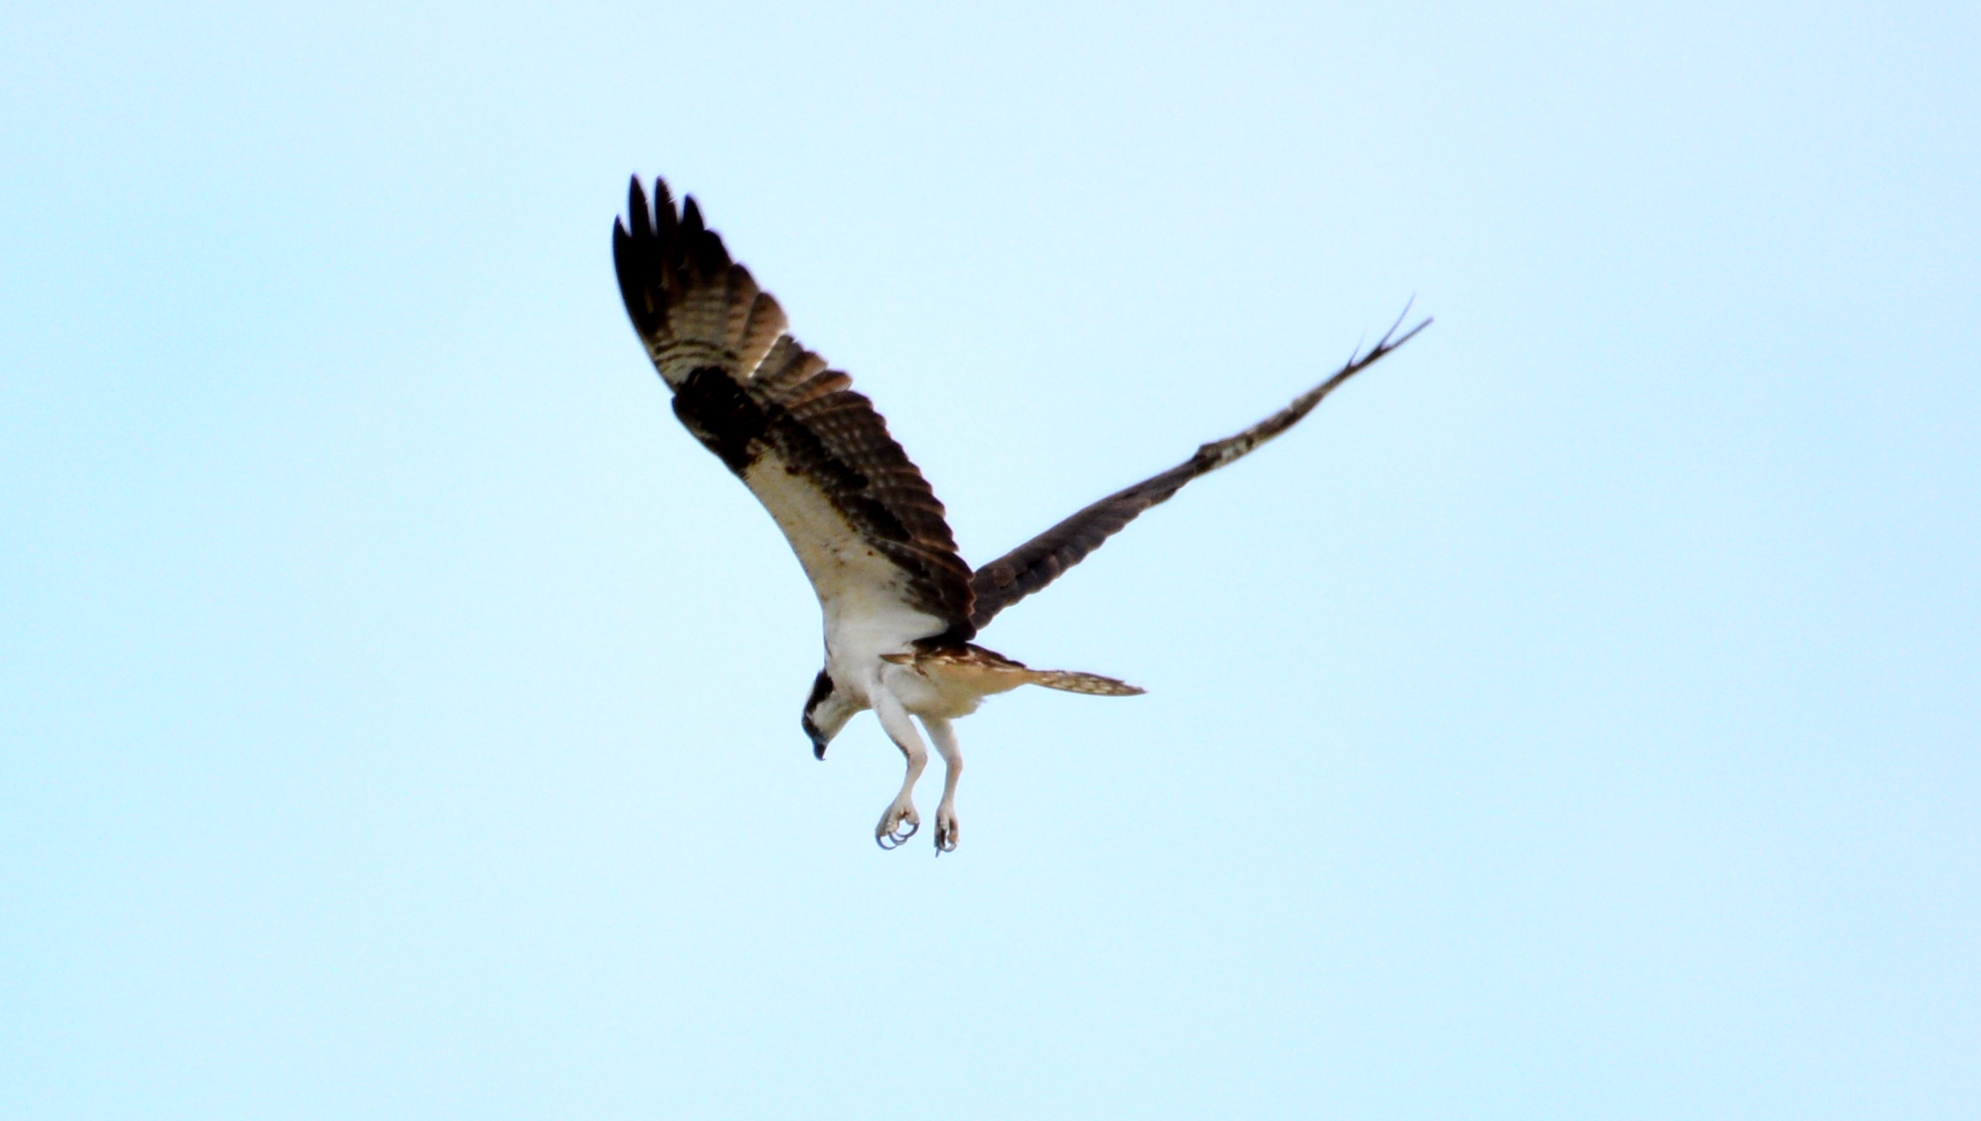 An Osprey hovers over the water just before displacing one of the Peregrines from its perch